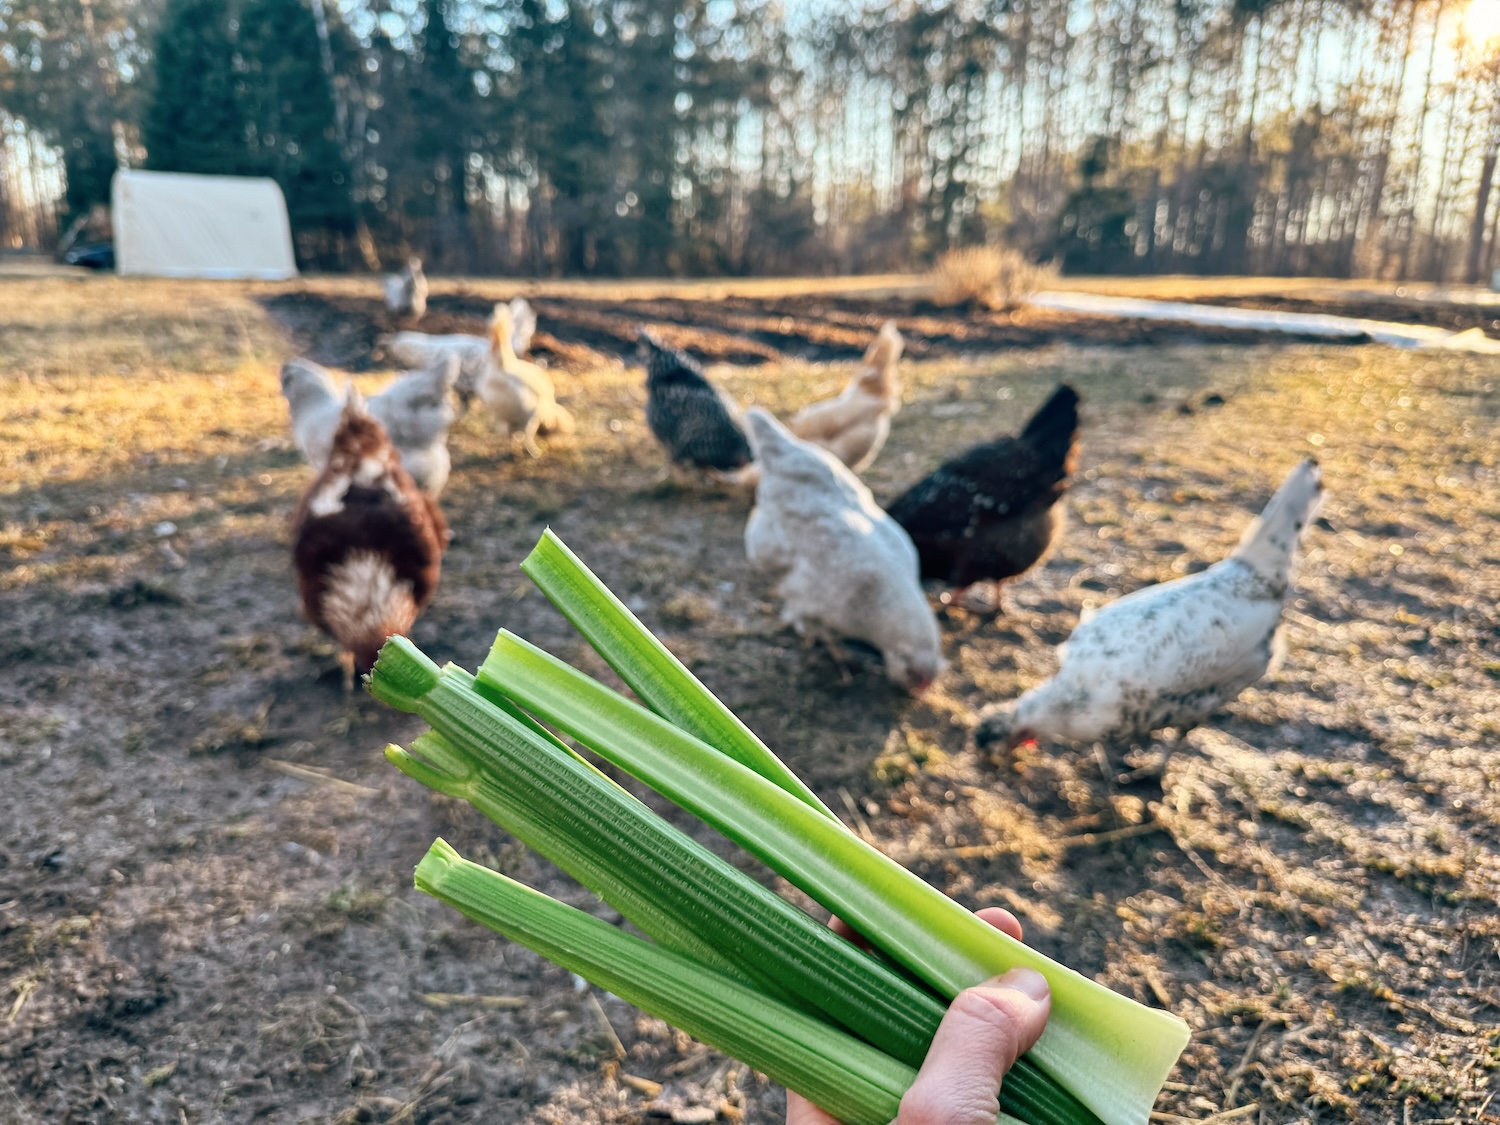 A flock of chickens out foraging and celery is held out before them.